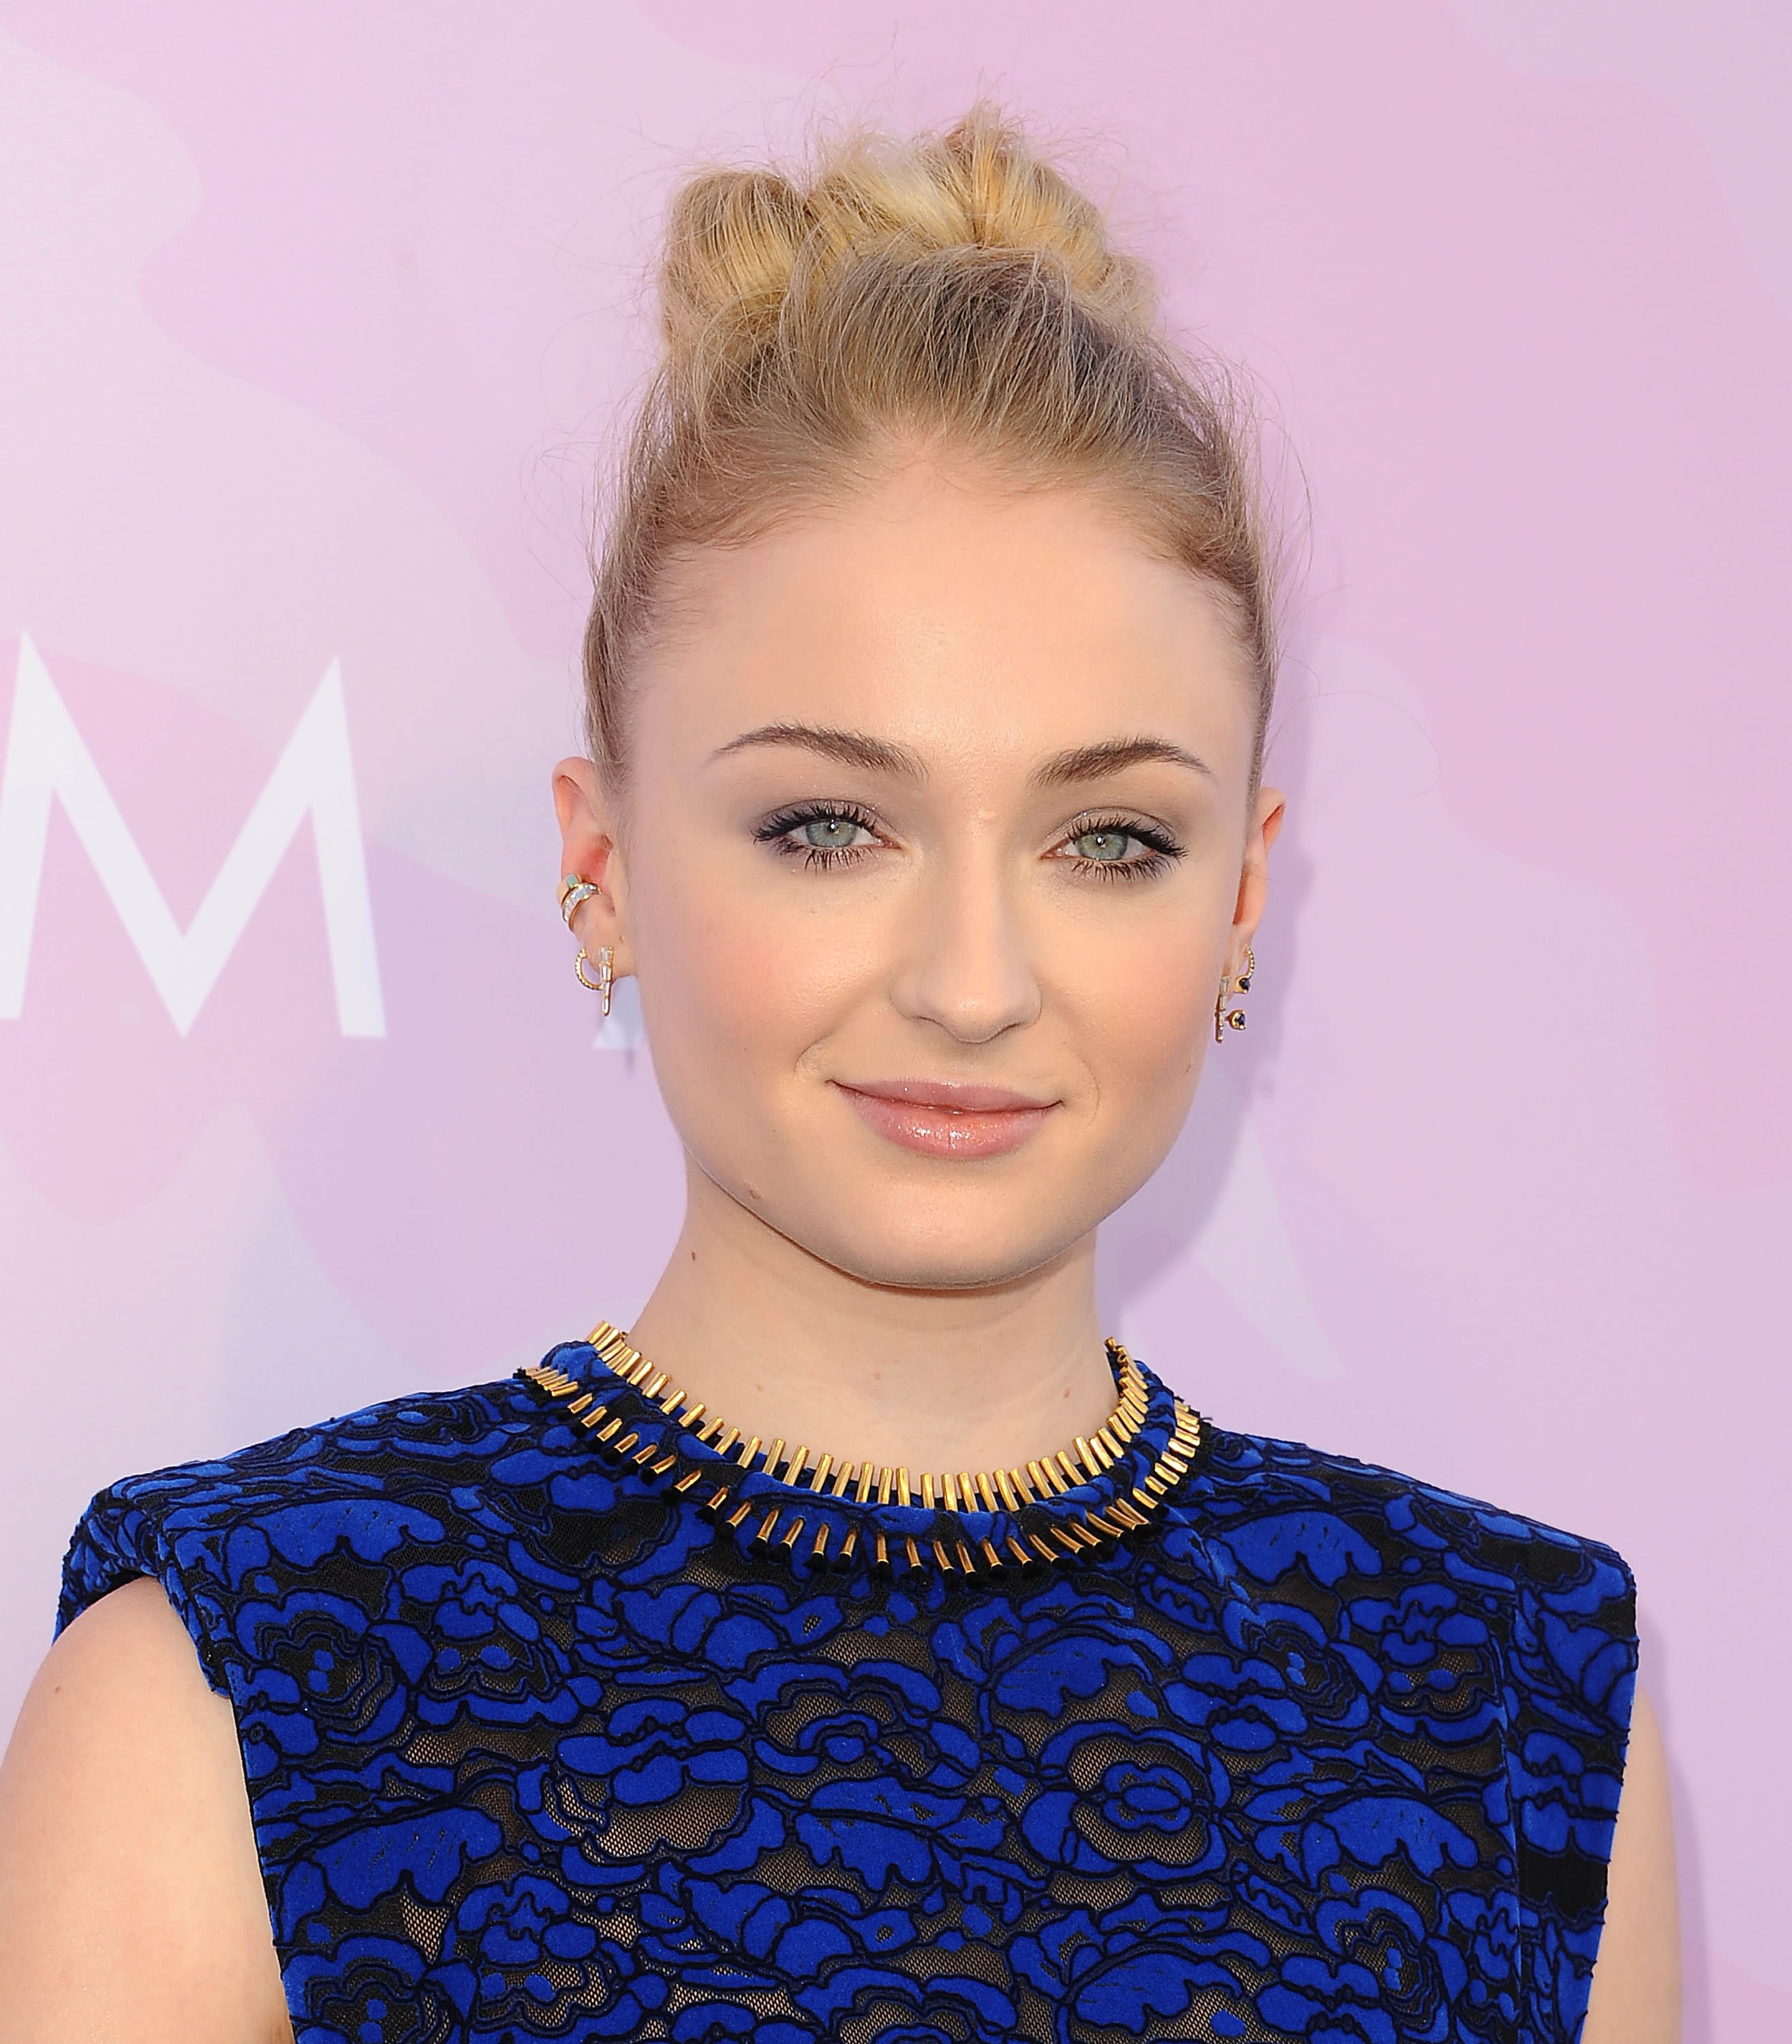 Sophie Turner Talks About Going Back To Blonde And Her New